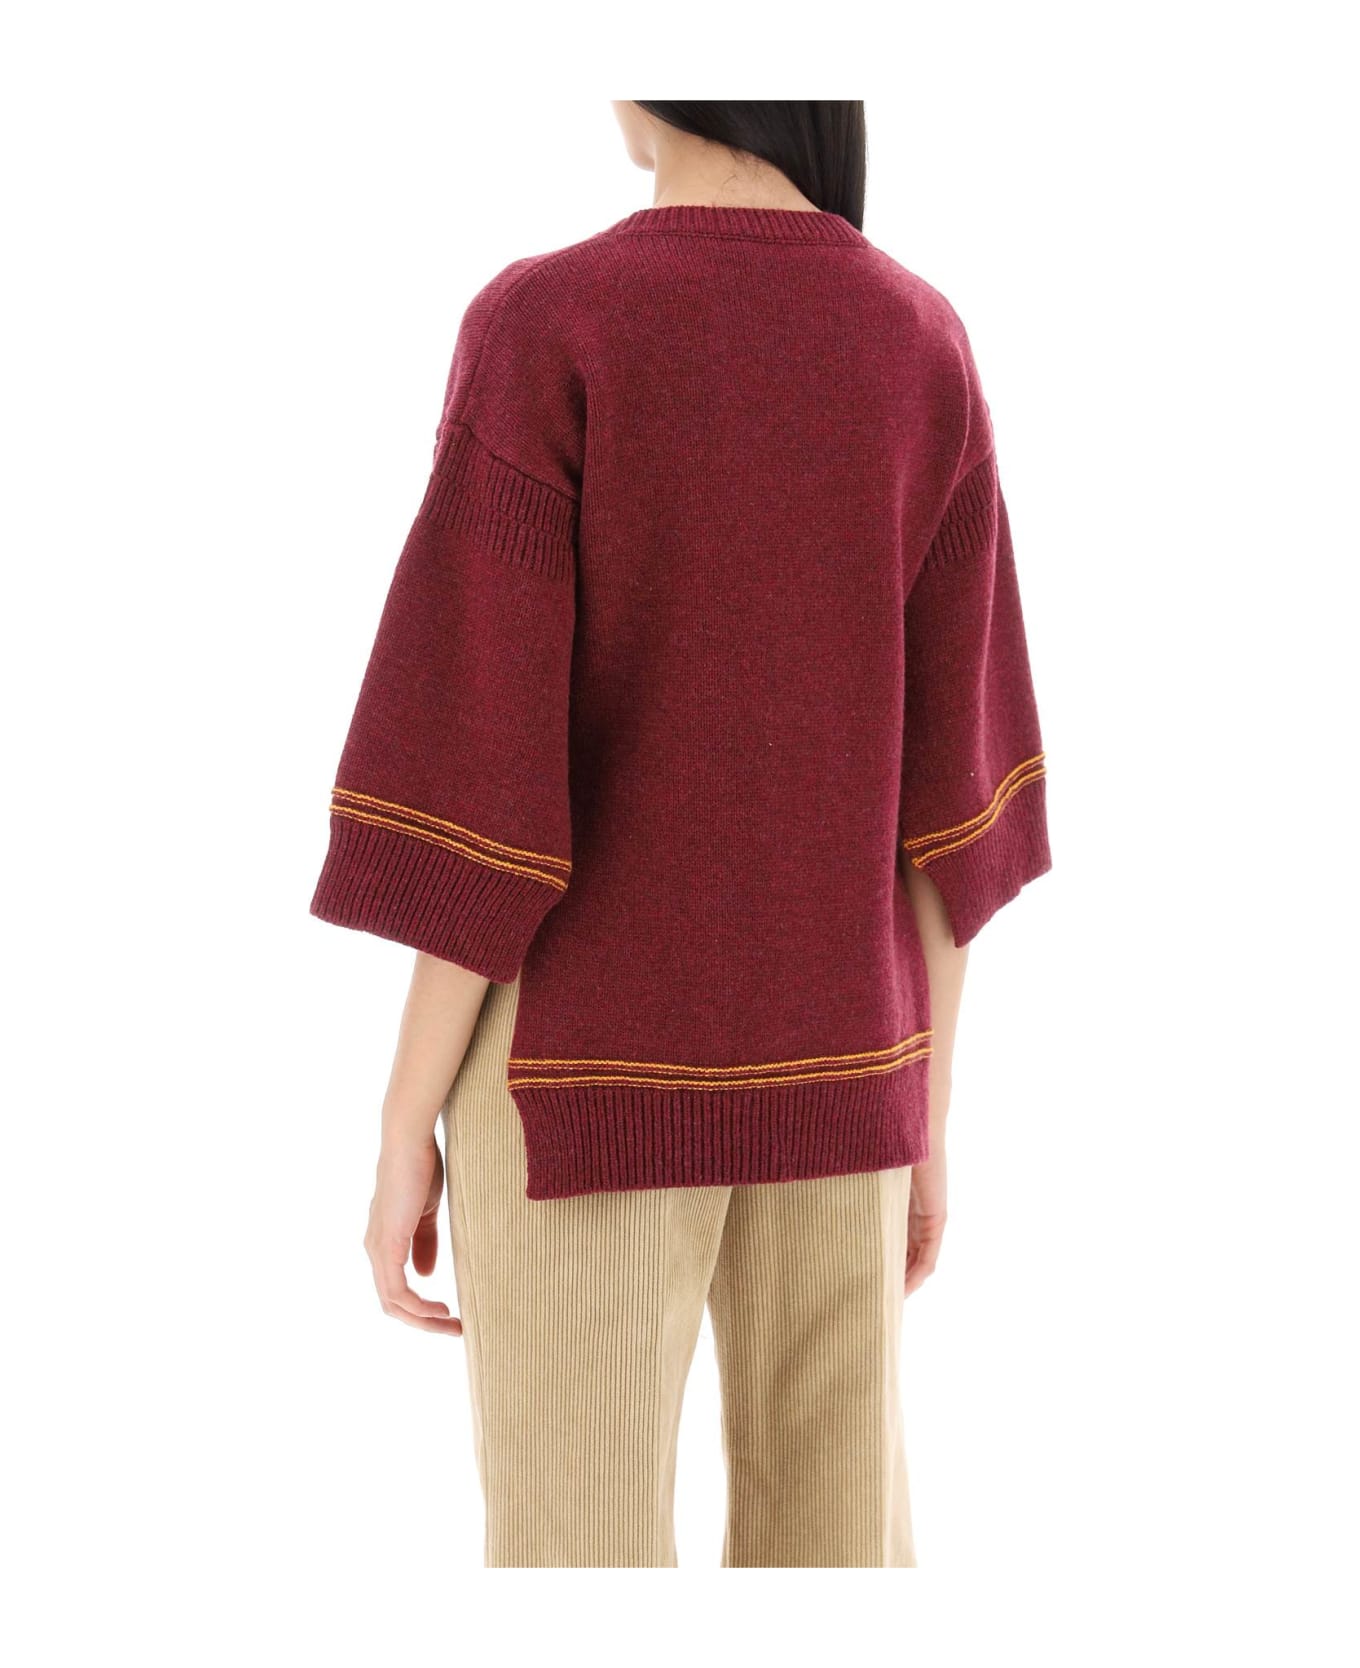 Marni Sweater In Jacquard Knit With Logo - RUBY (Red) ニットウェア